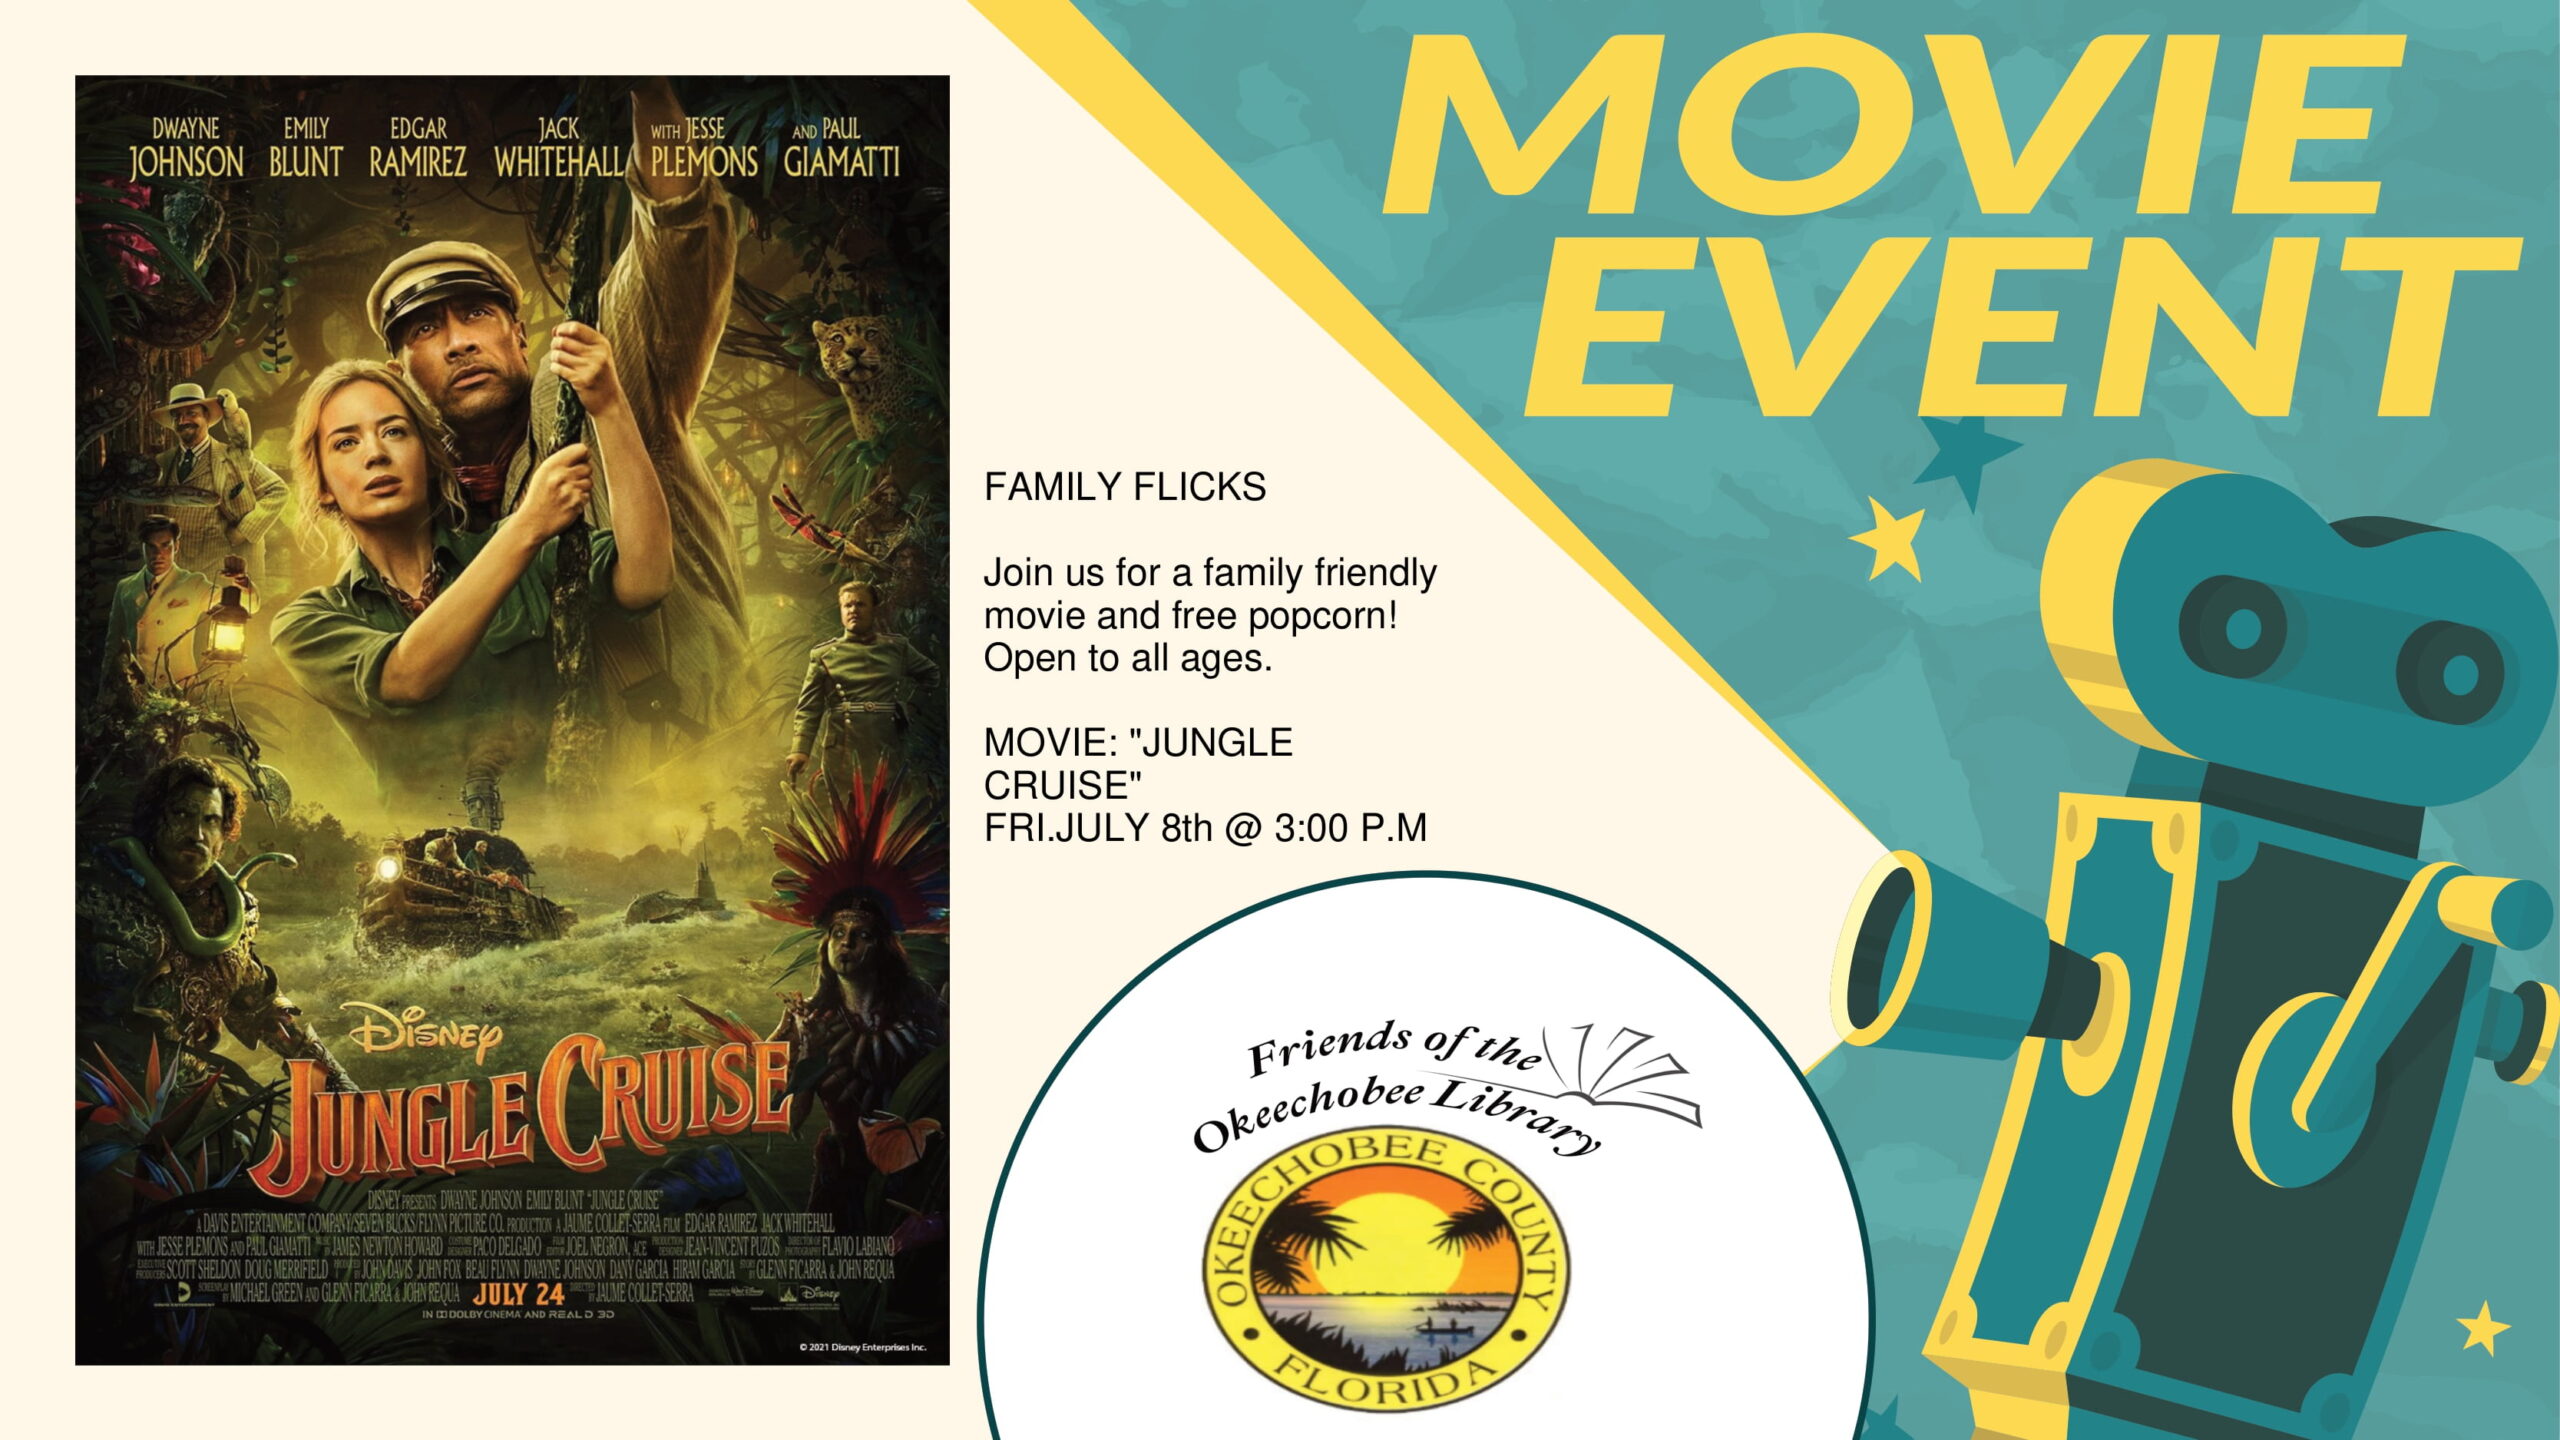 Don't forget to stop by the Okeechobee Library tomorrow at 3:00 p.m. for a free movie presentation of Disney Jungle Cruise. Popcorn will be provided.